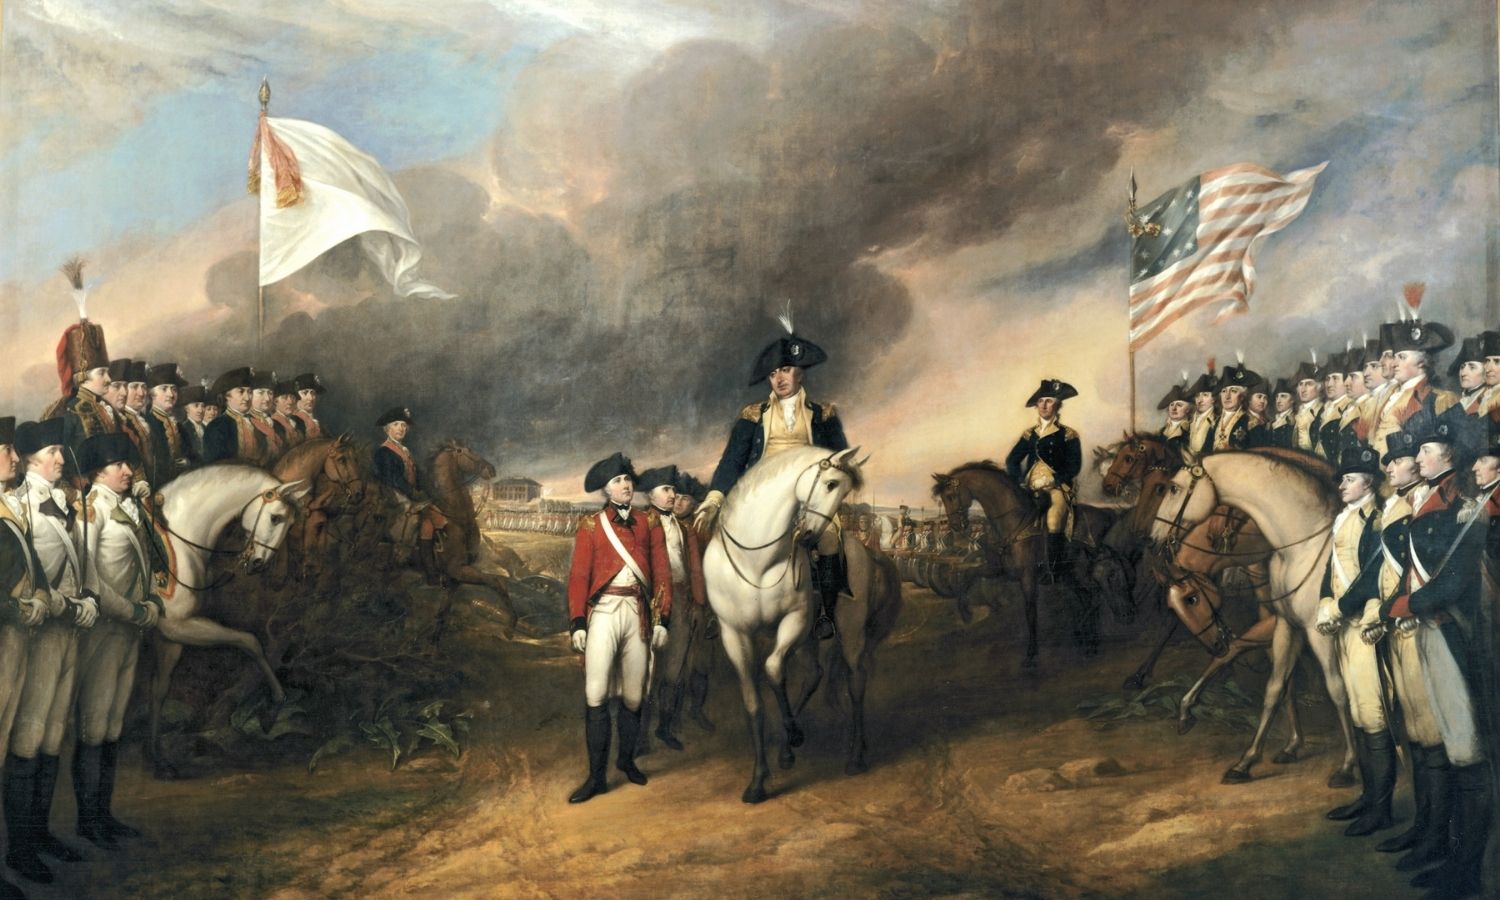 OTD in 1781: The American Revolutionary War hostiles ended after the British conceded at Yorktown.